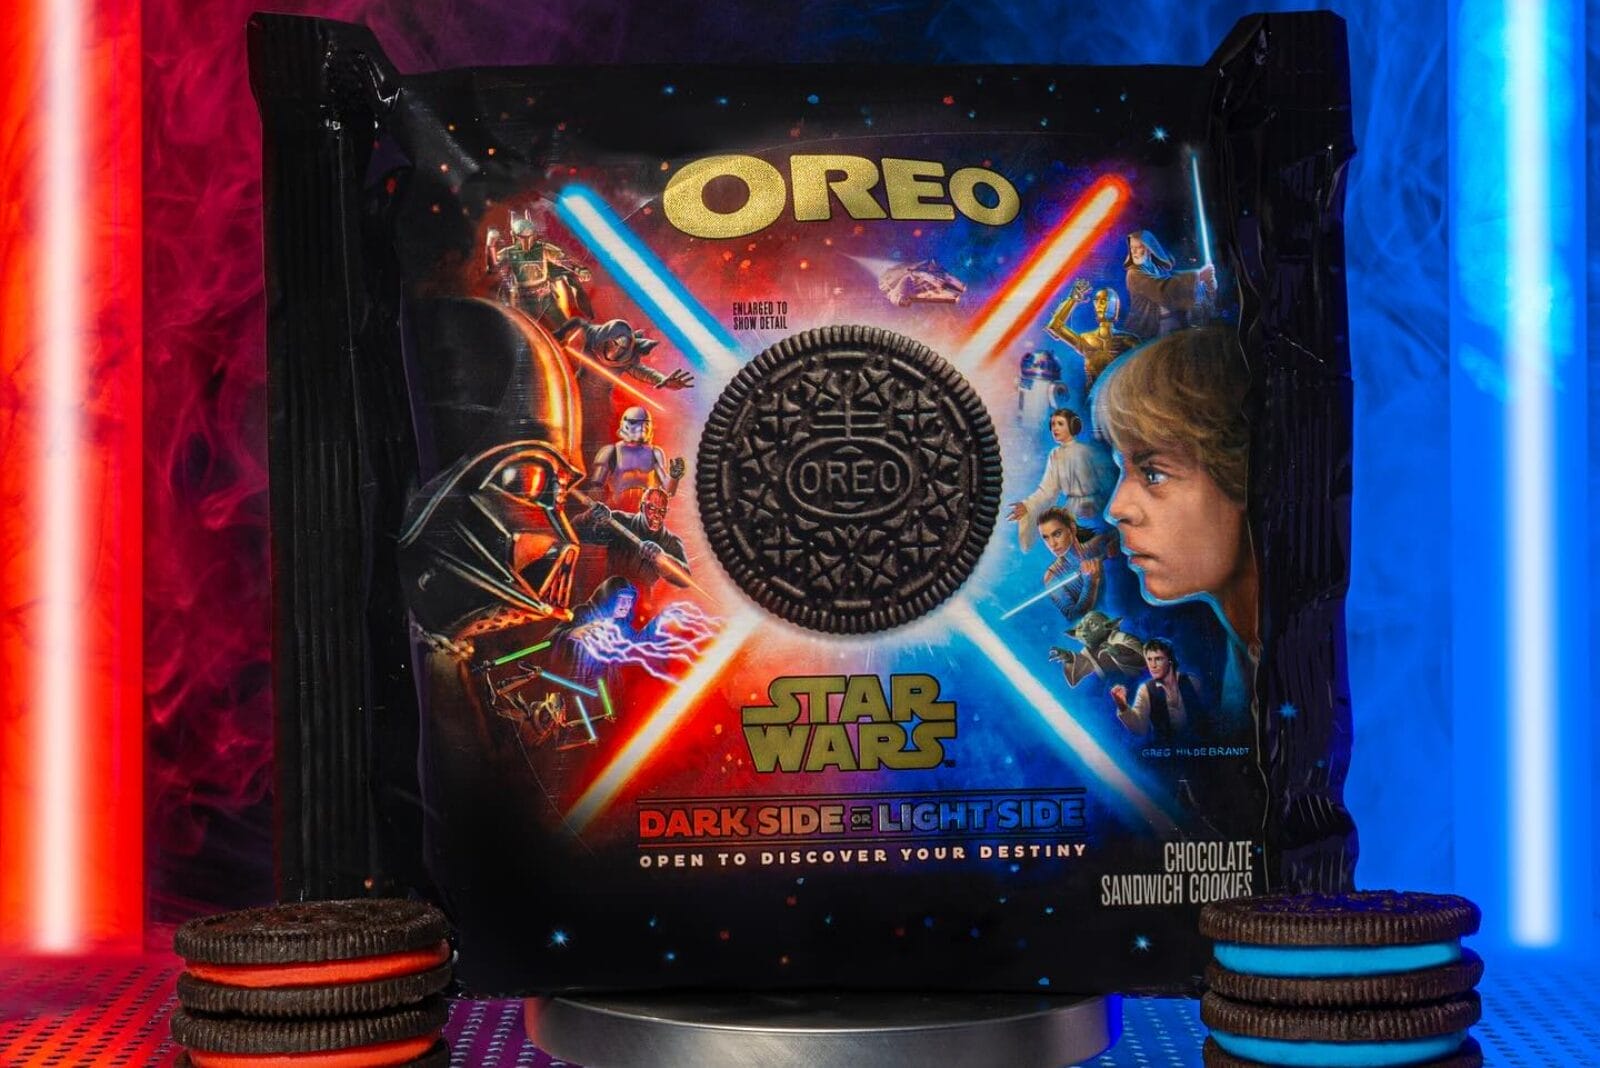 Package of Star Wars-themed OREOs next to lightsabers.